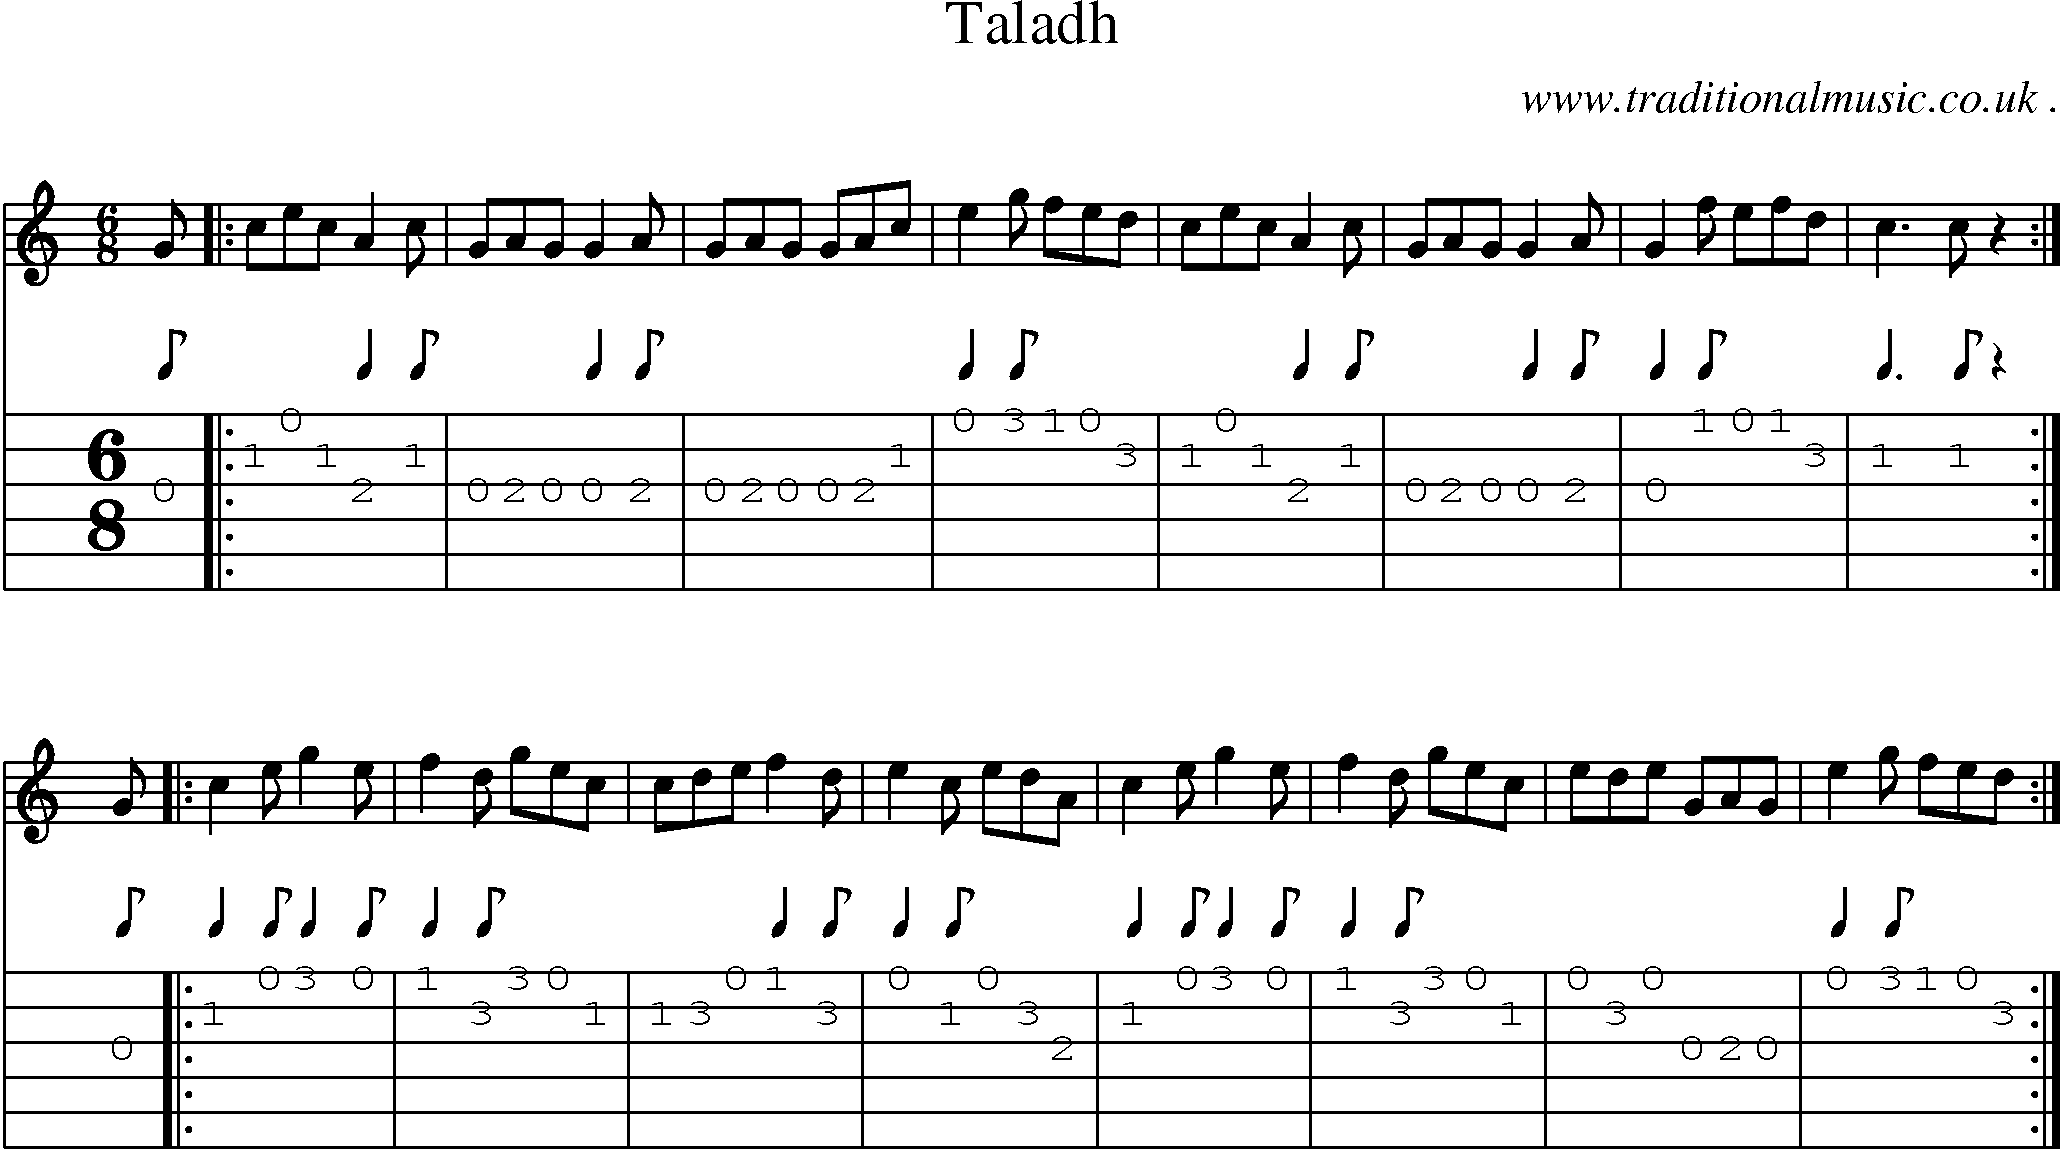 Sheet-music  score, Chords and Guitar Tabs for Taladh